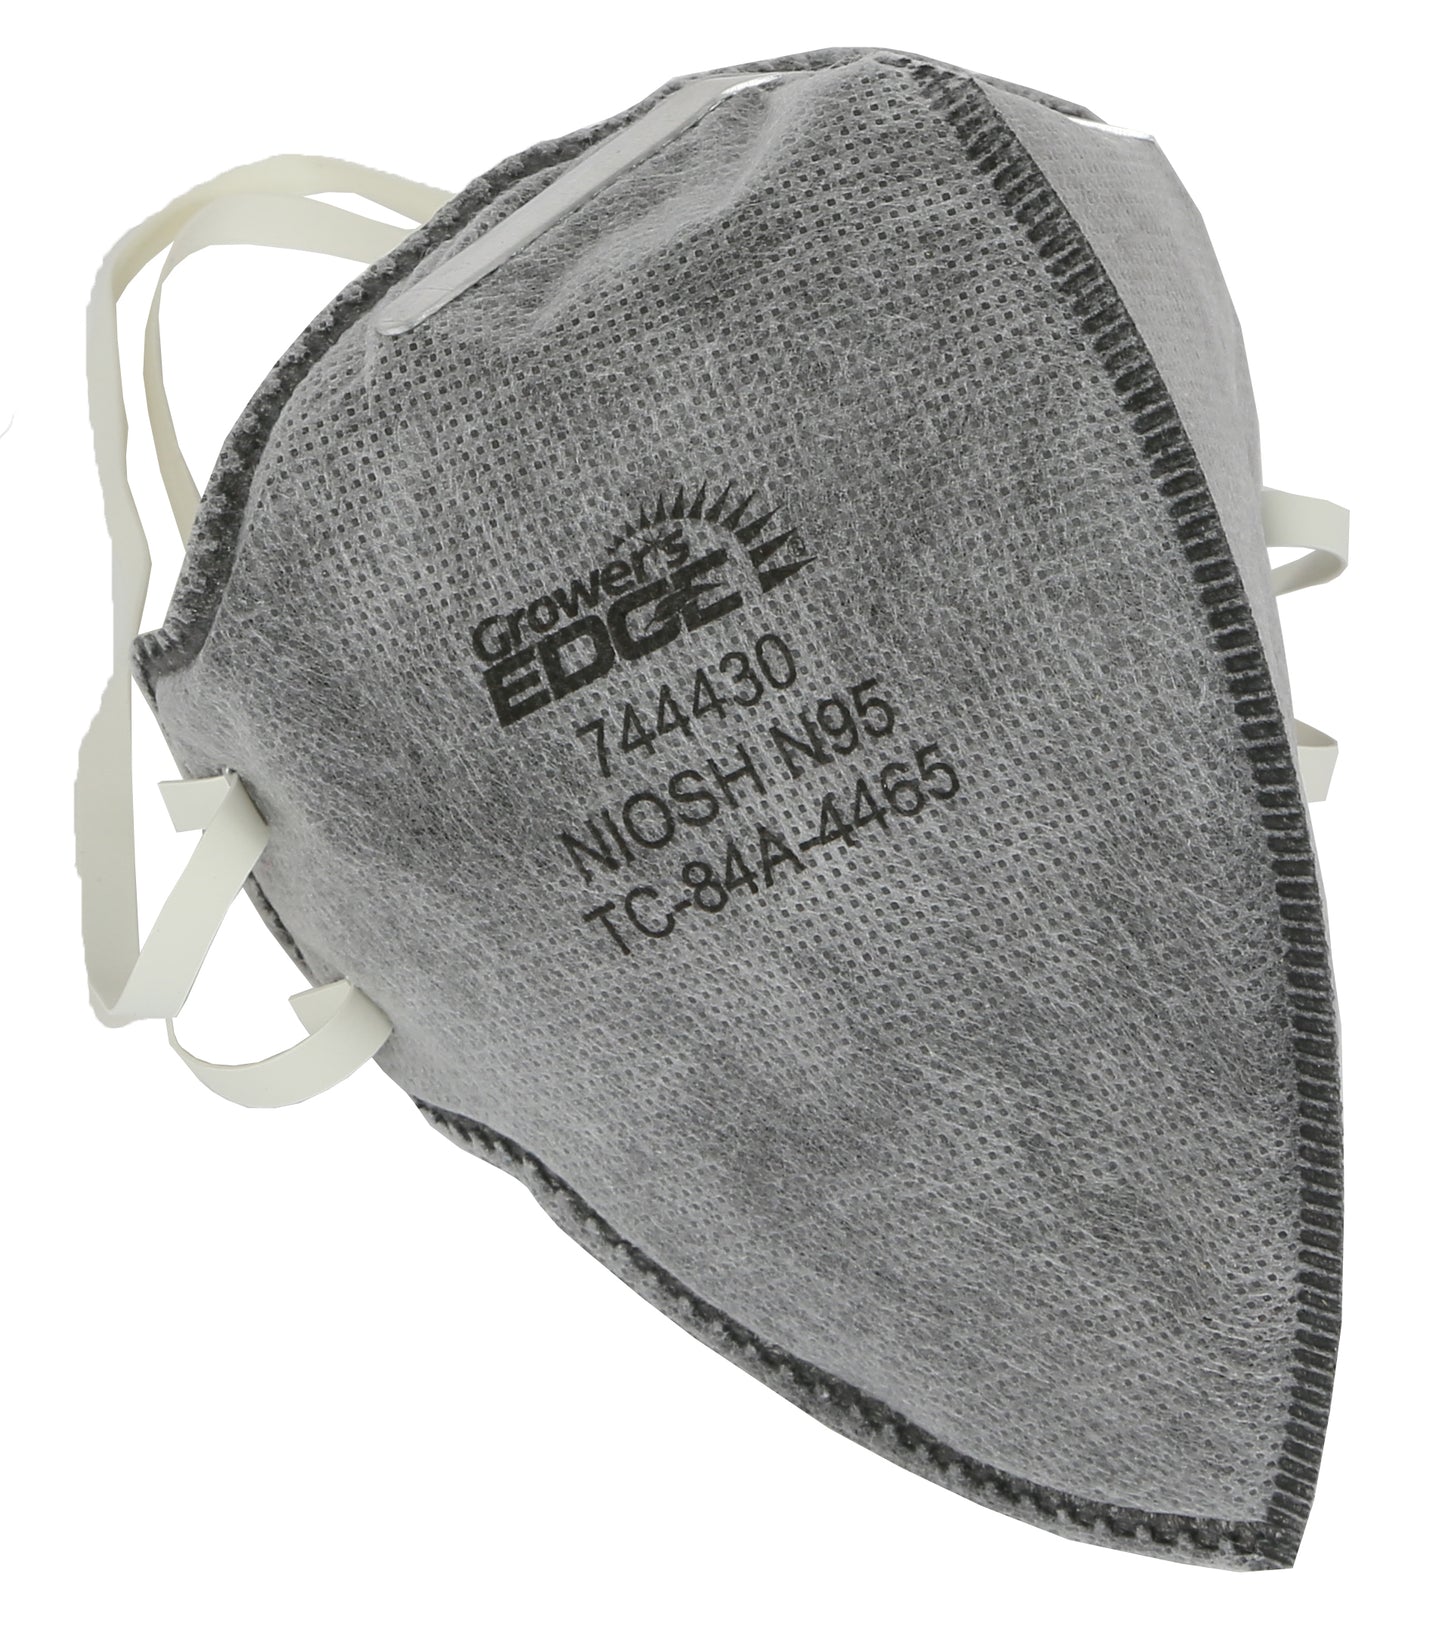 Grower’s Edge® Clean Room Disposable Respirator Masks